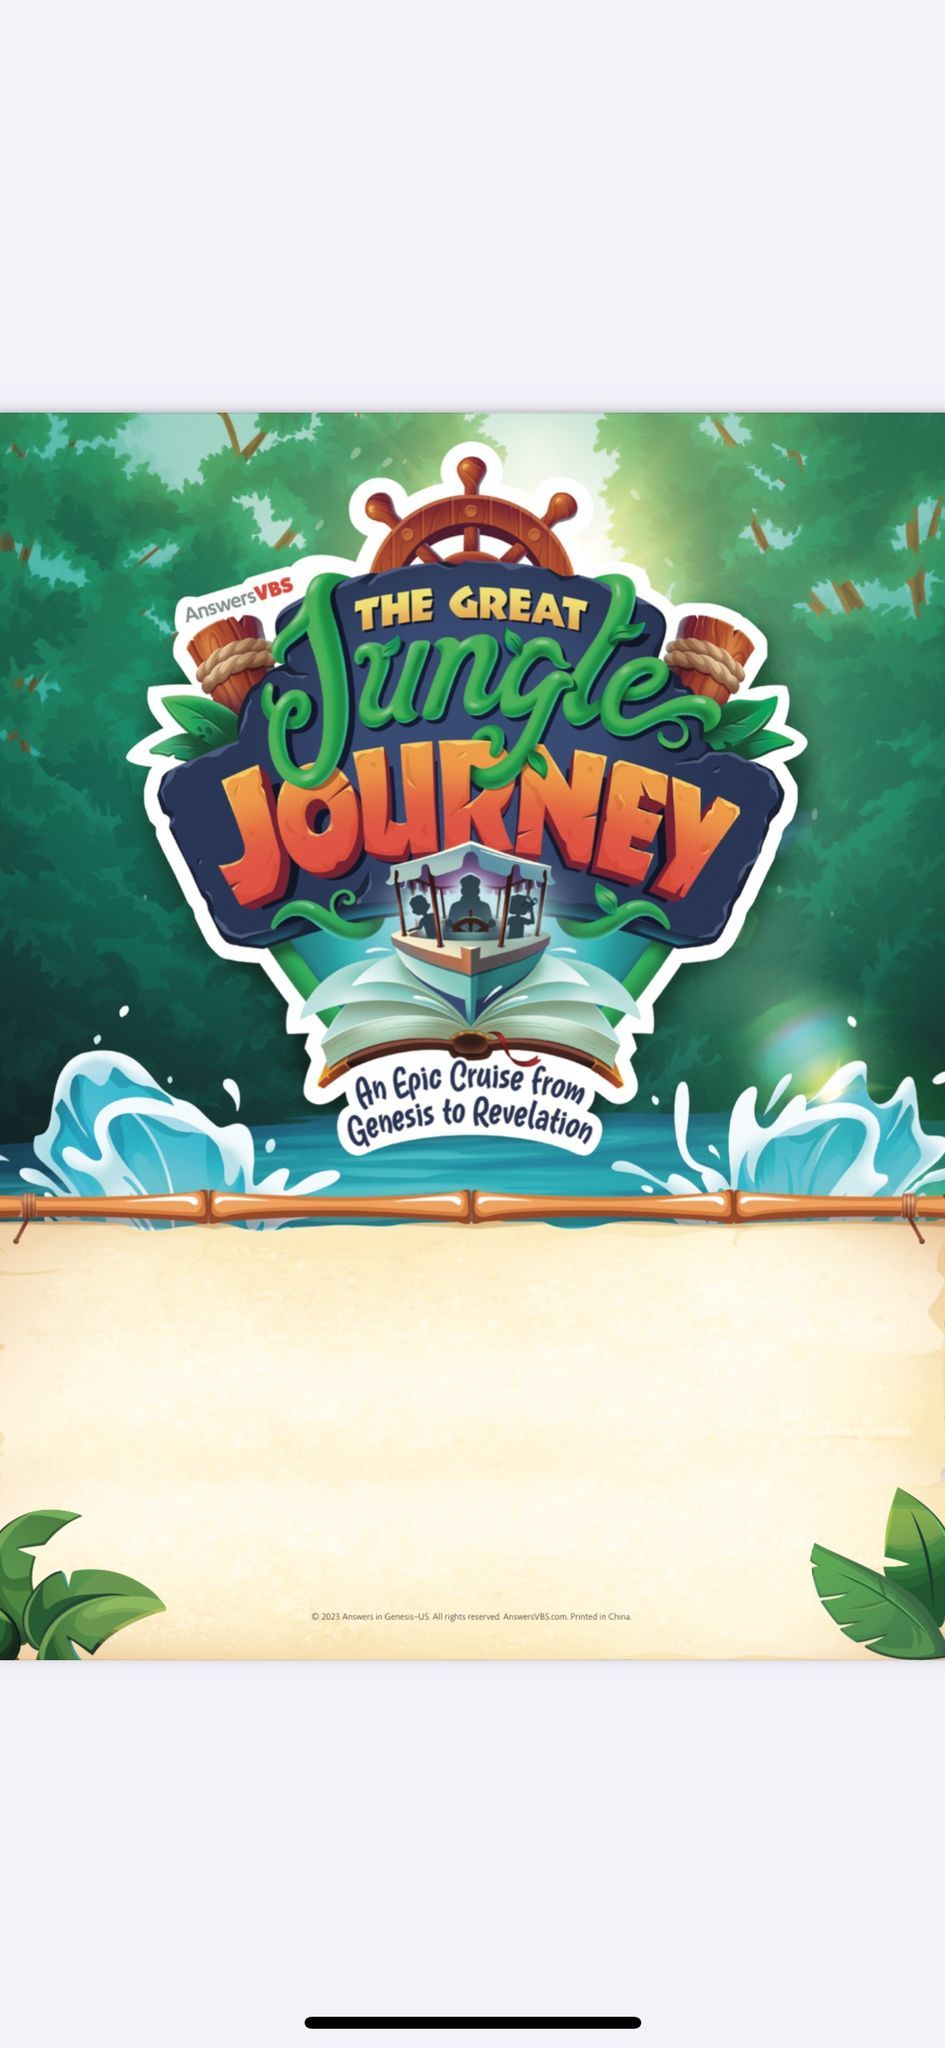 The Great Jungle Journey VBS 